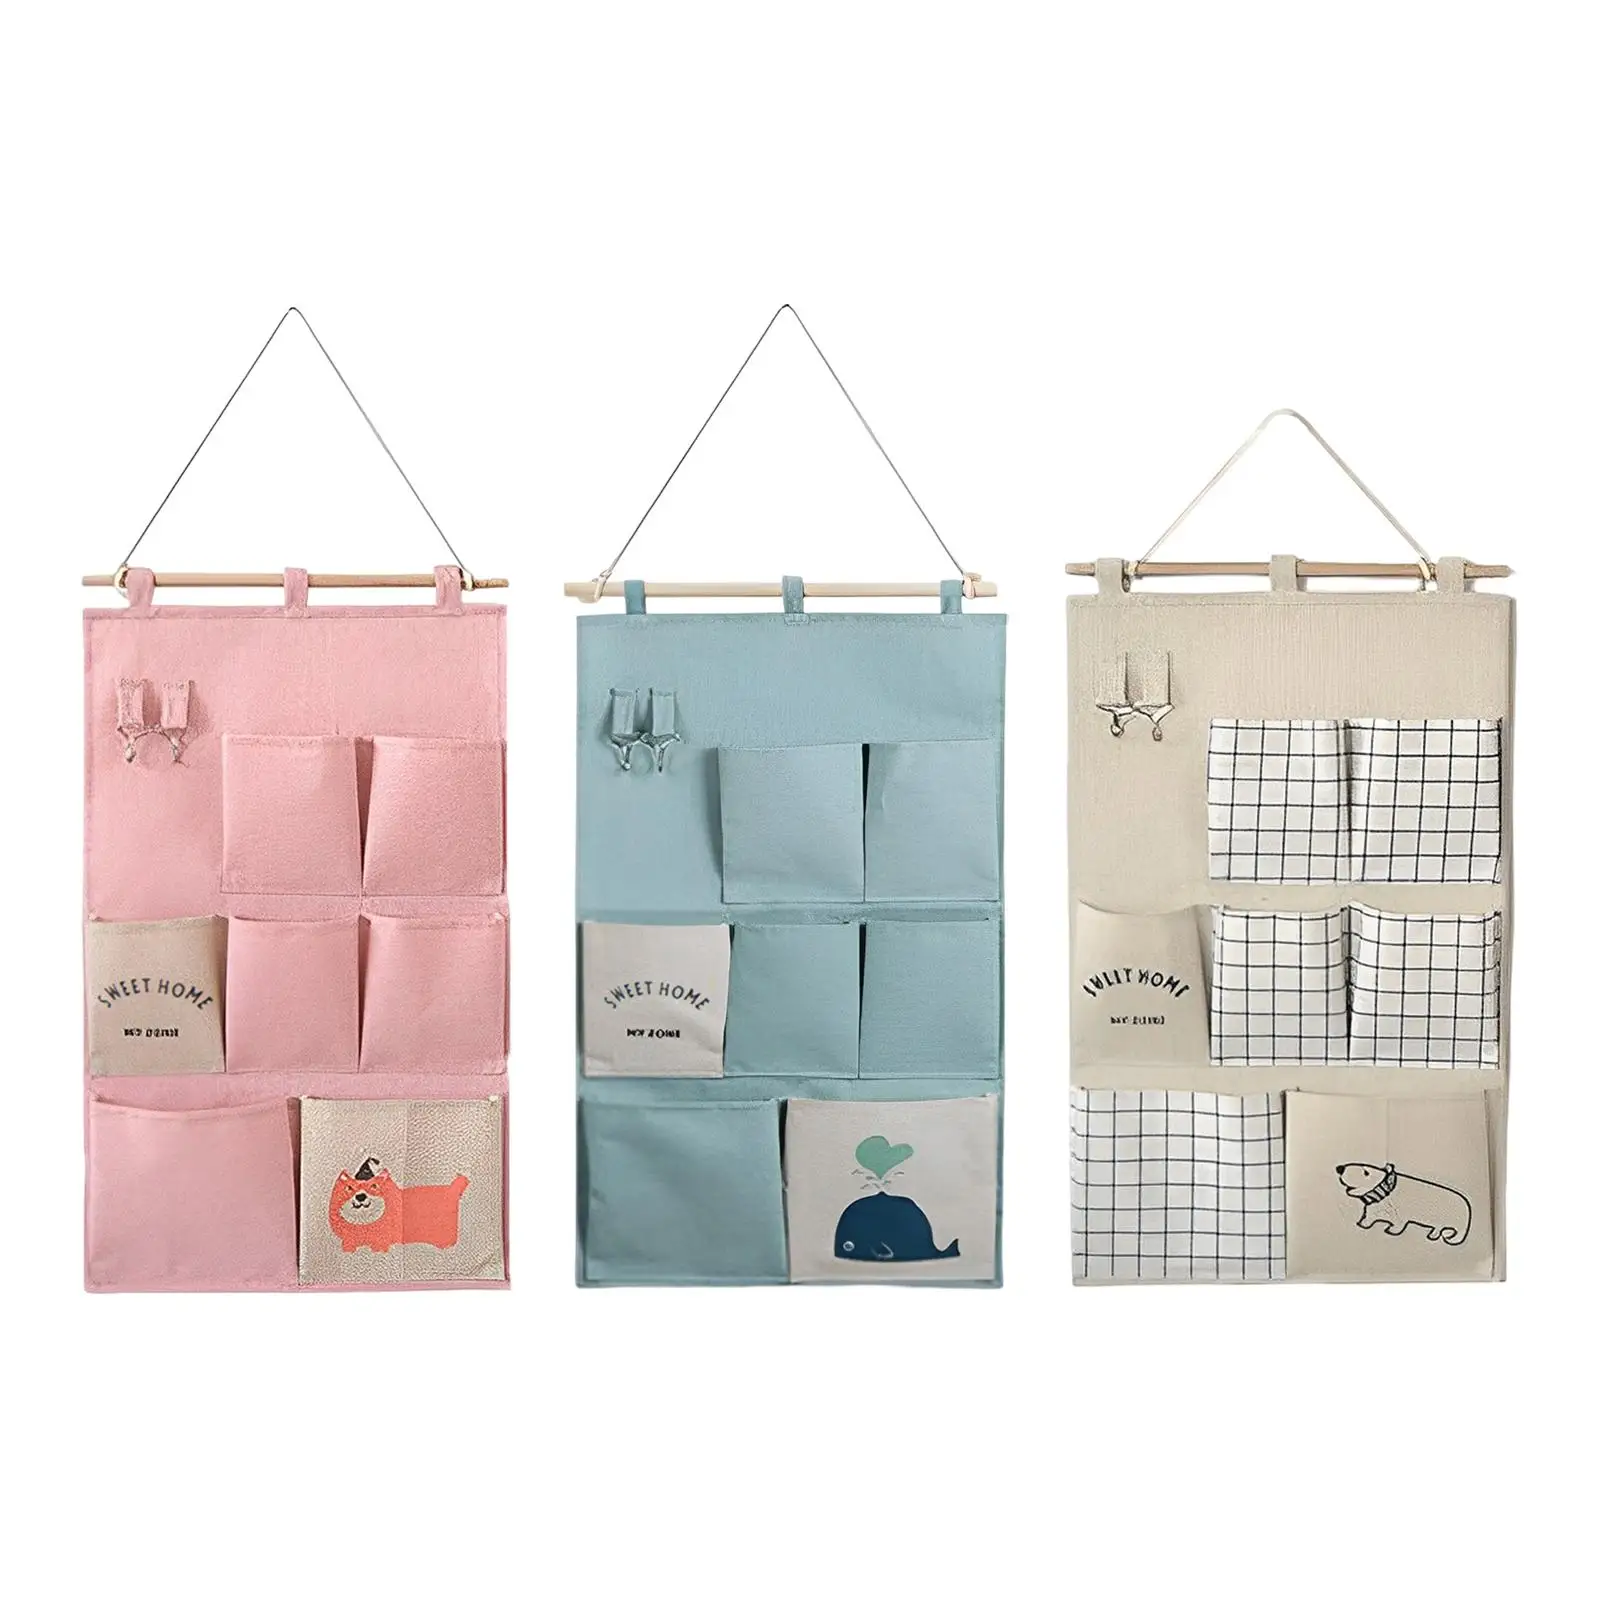 Wall Door Hanging Bag Organizer with 7 Pockets for Bathroom Office Closet